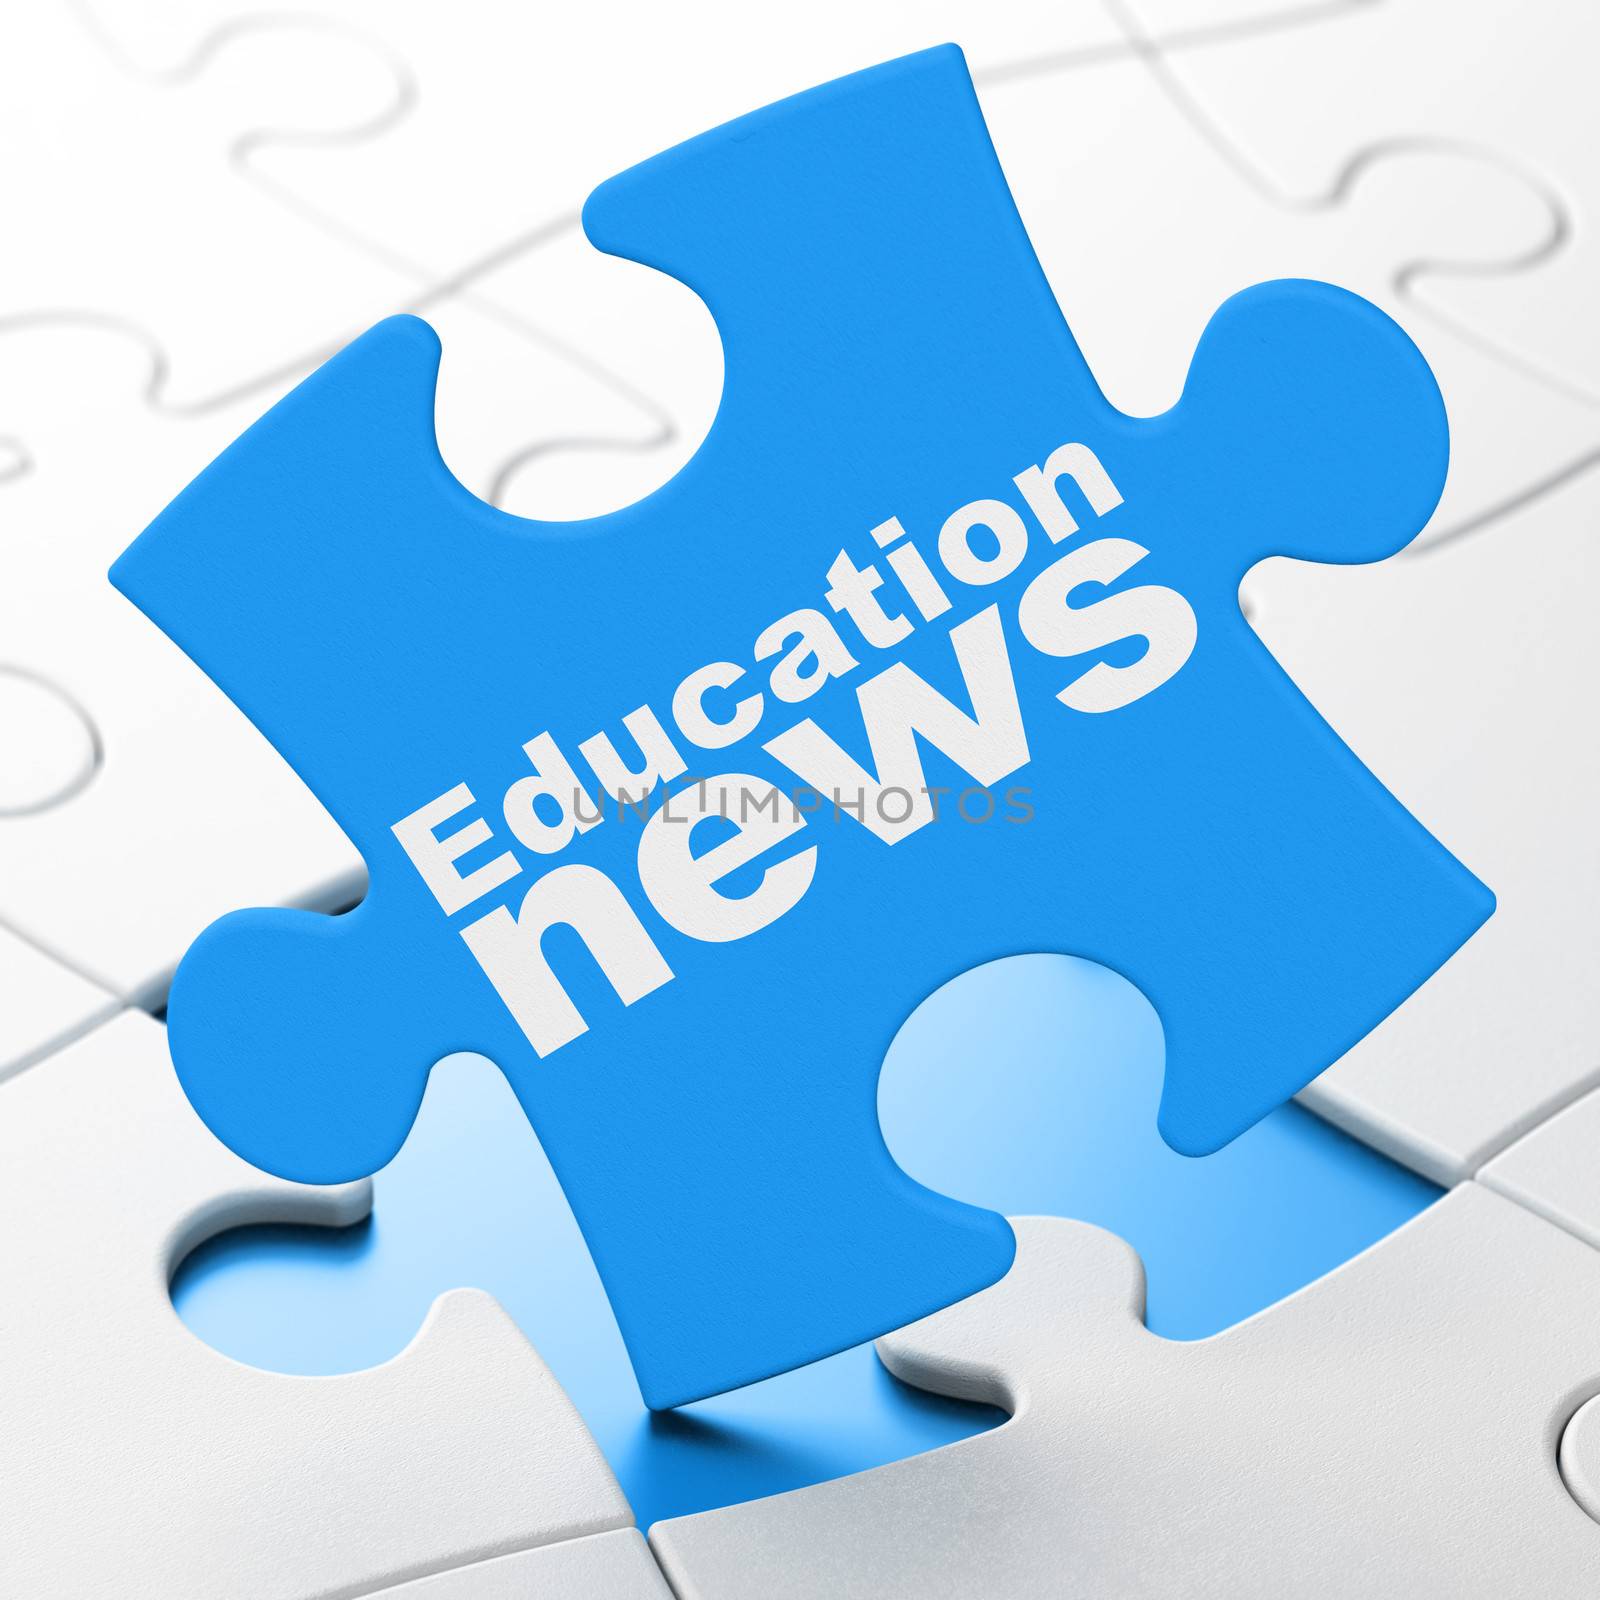 News concept: Education News on puzzle background by maxkabakov